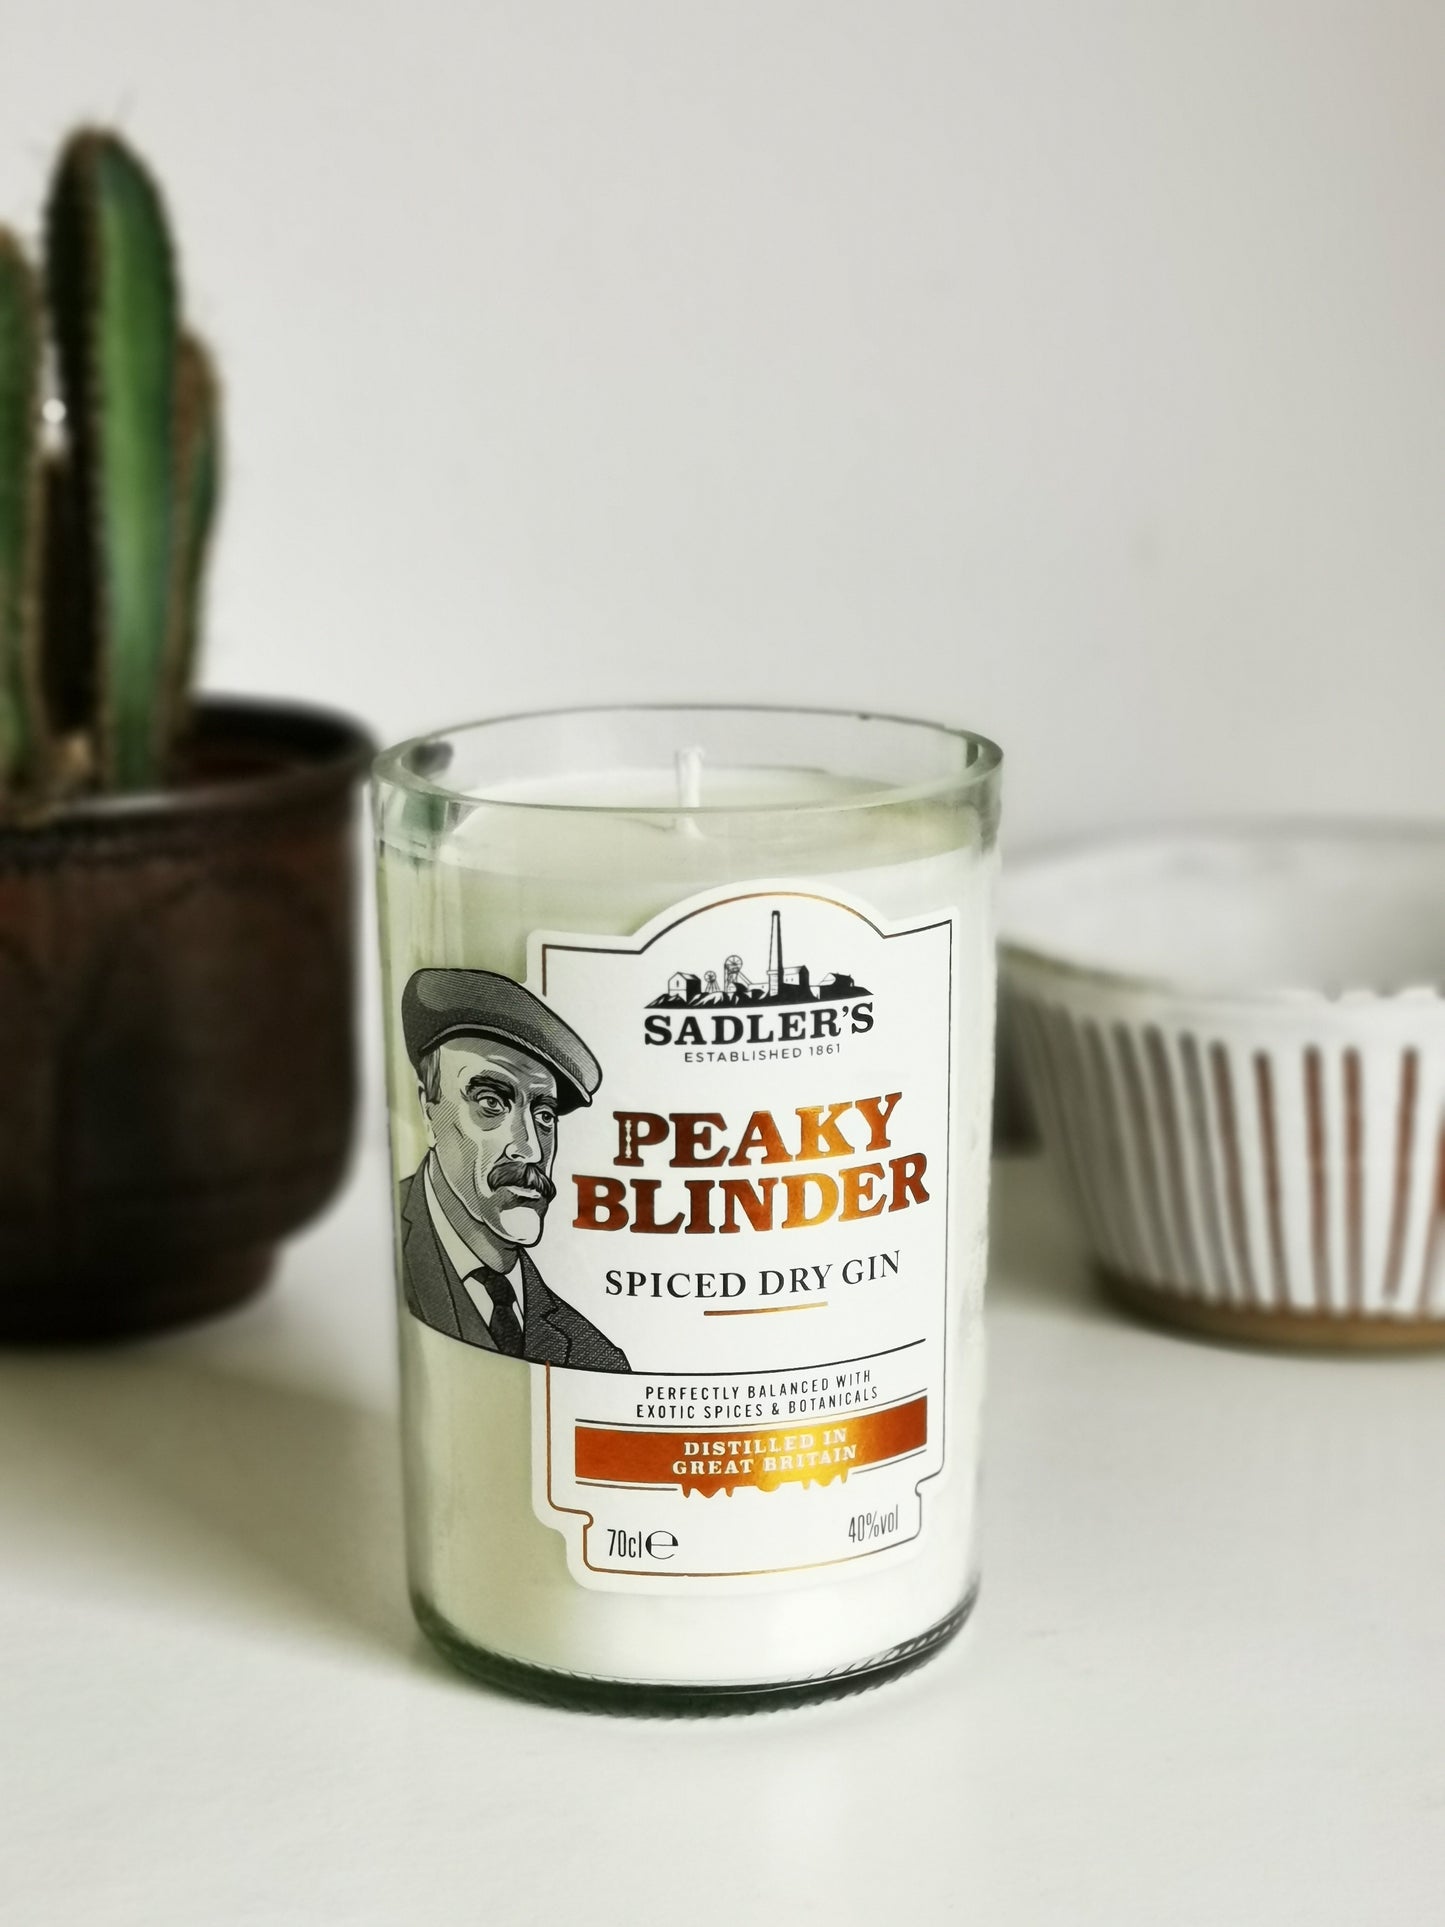 Peaky Blinder Spiced Dry Gin Bottle Candle